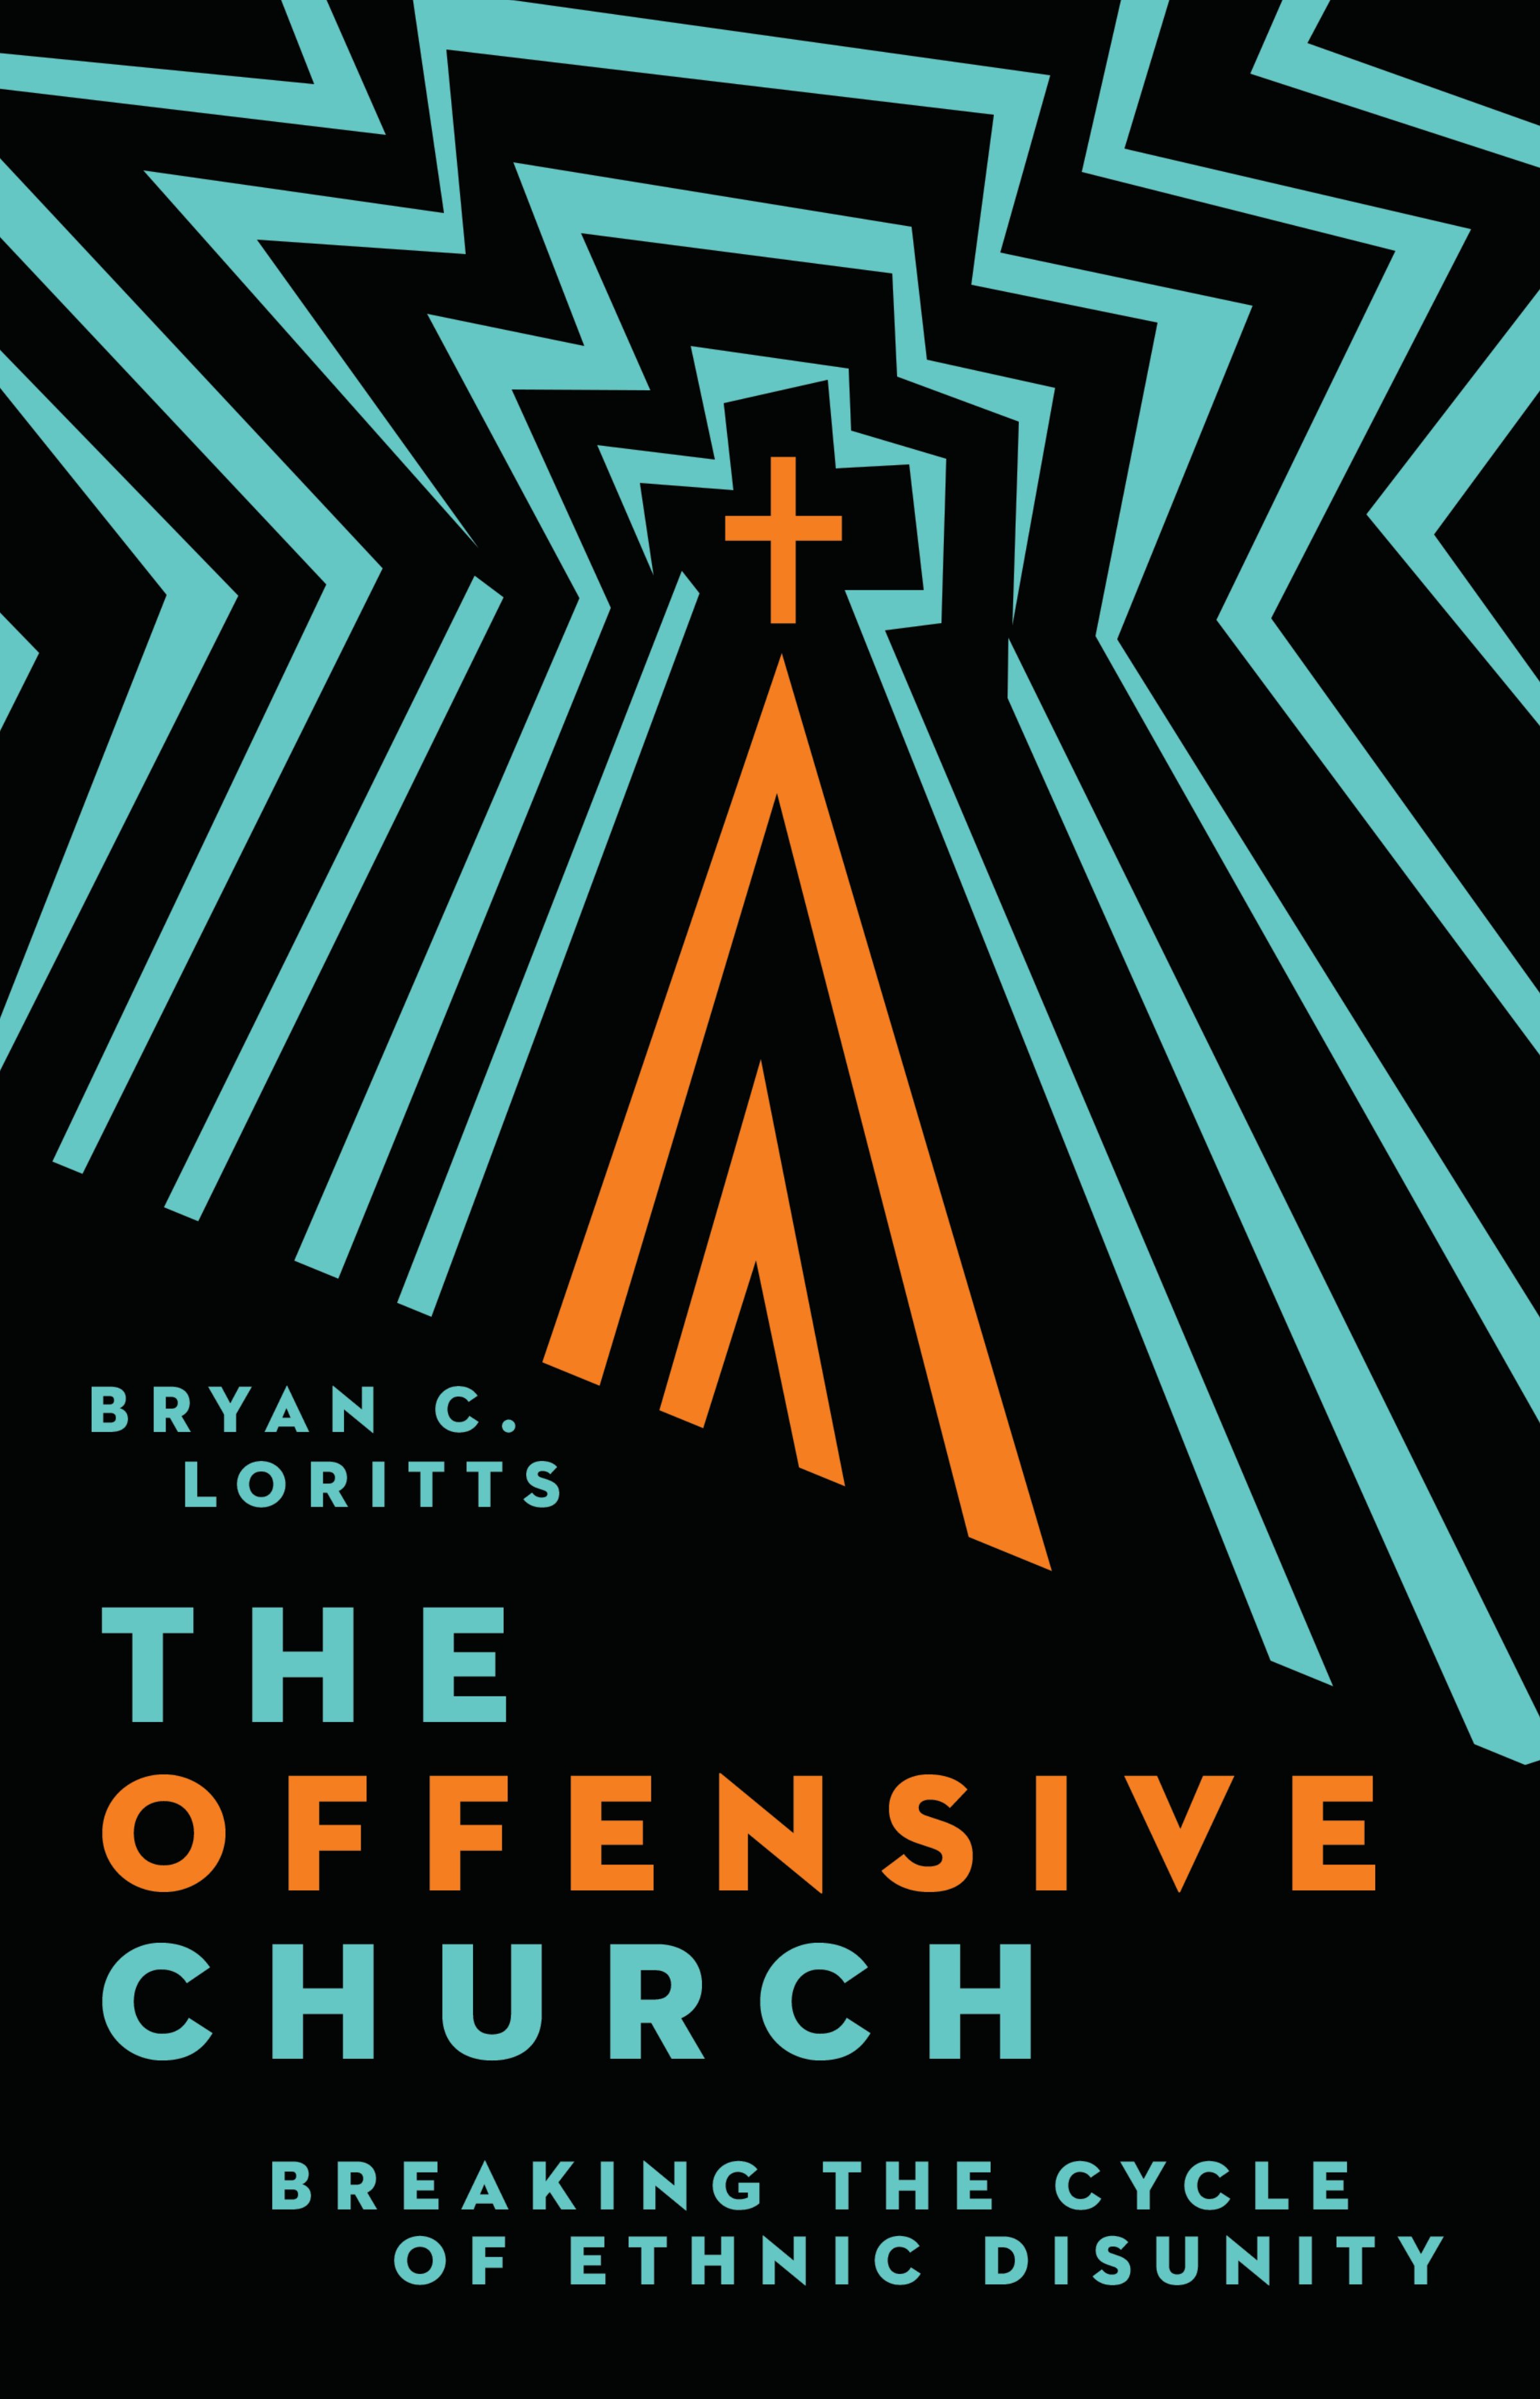 HiRes_JPG-The Offensive Church #A0597 front-cover.jpg